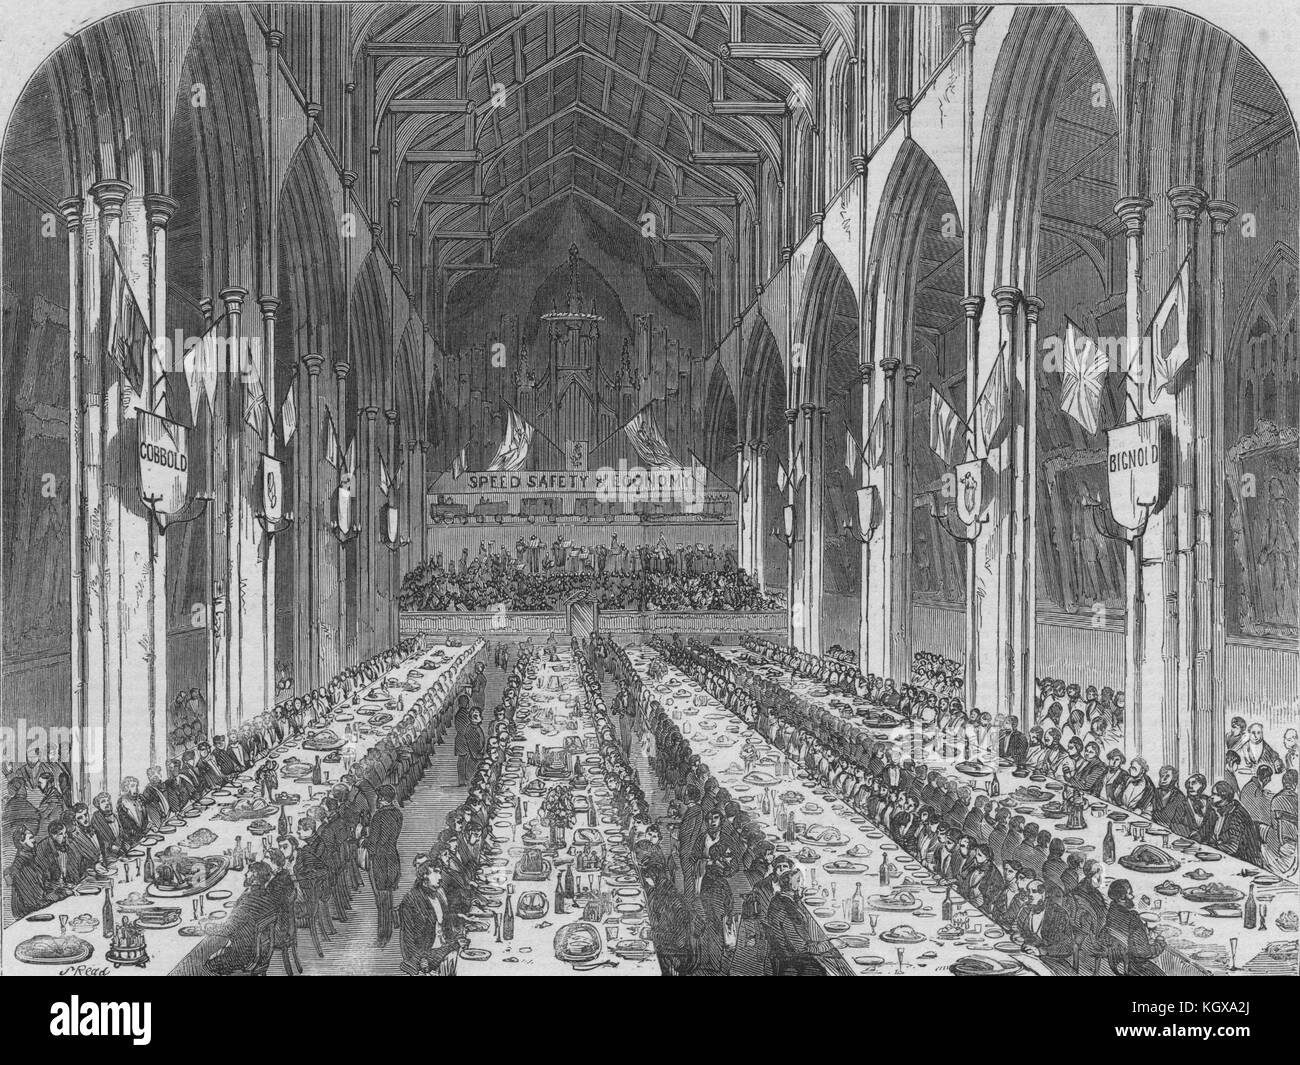 Opening of the Norwich & Ipswich Railway. The dinner in St. Andrew's Hall 1849. The Illustrated London News Stock Photo